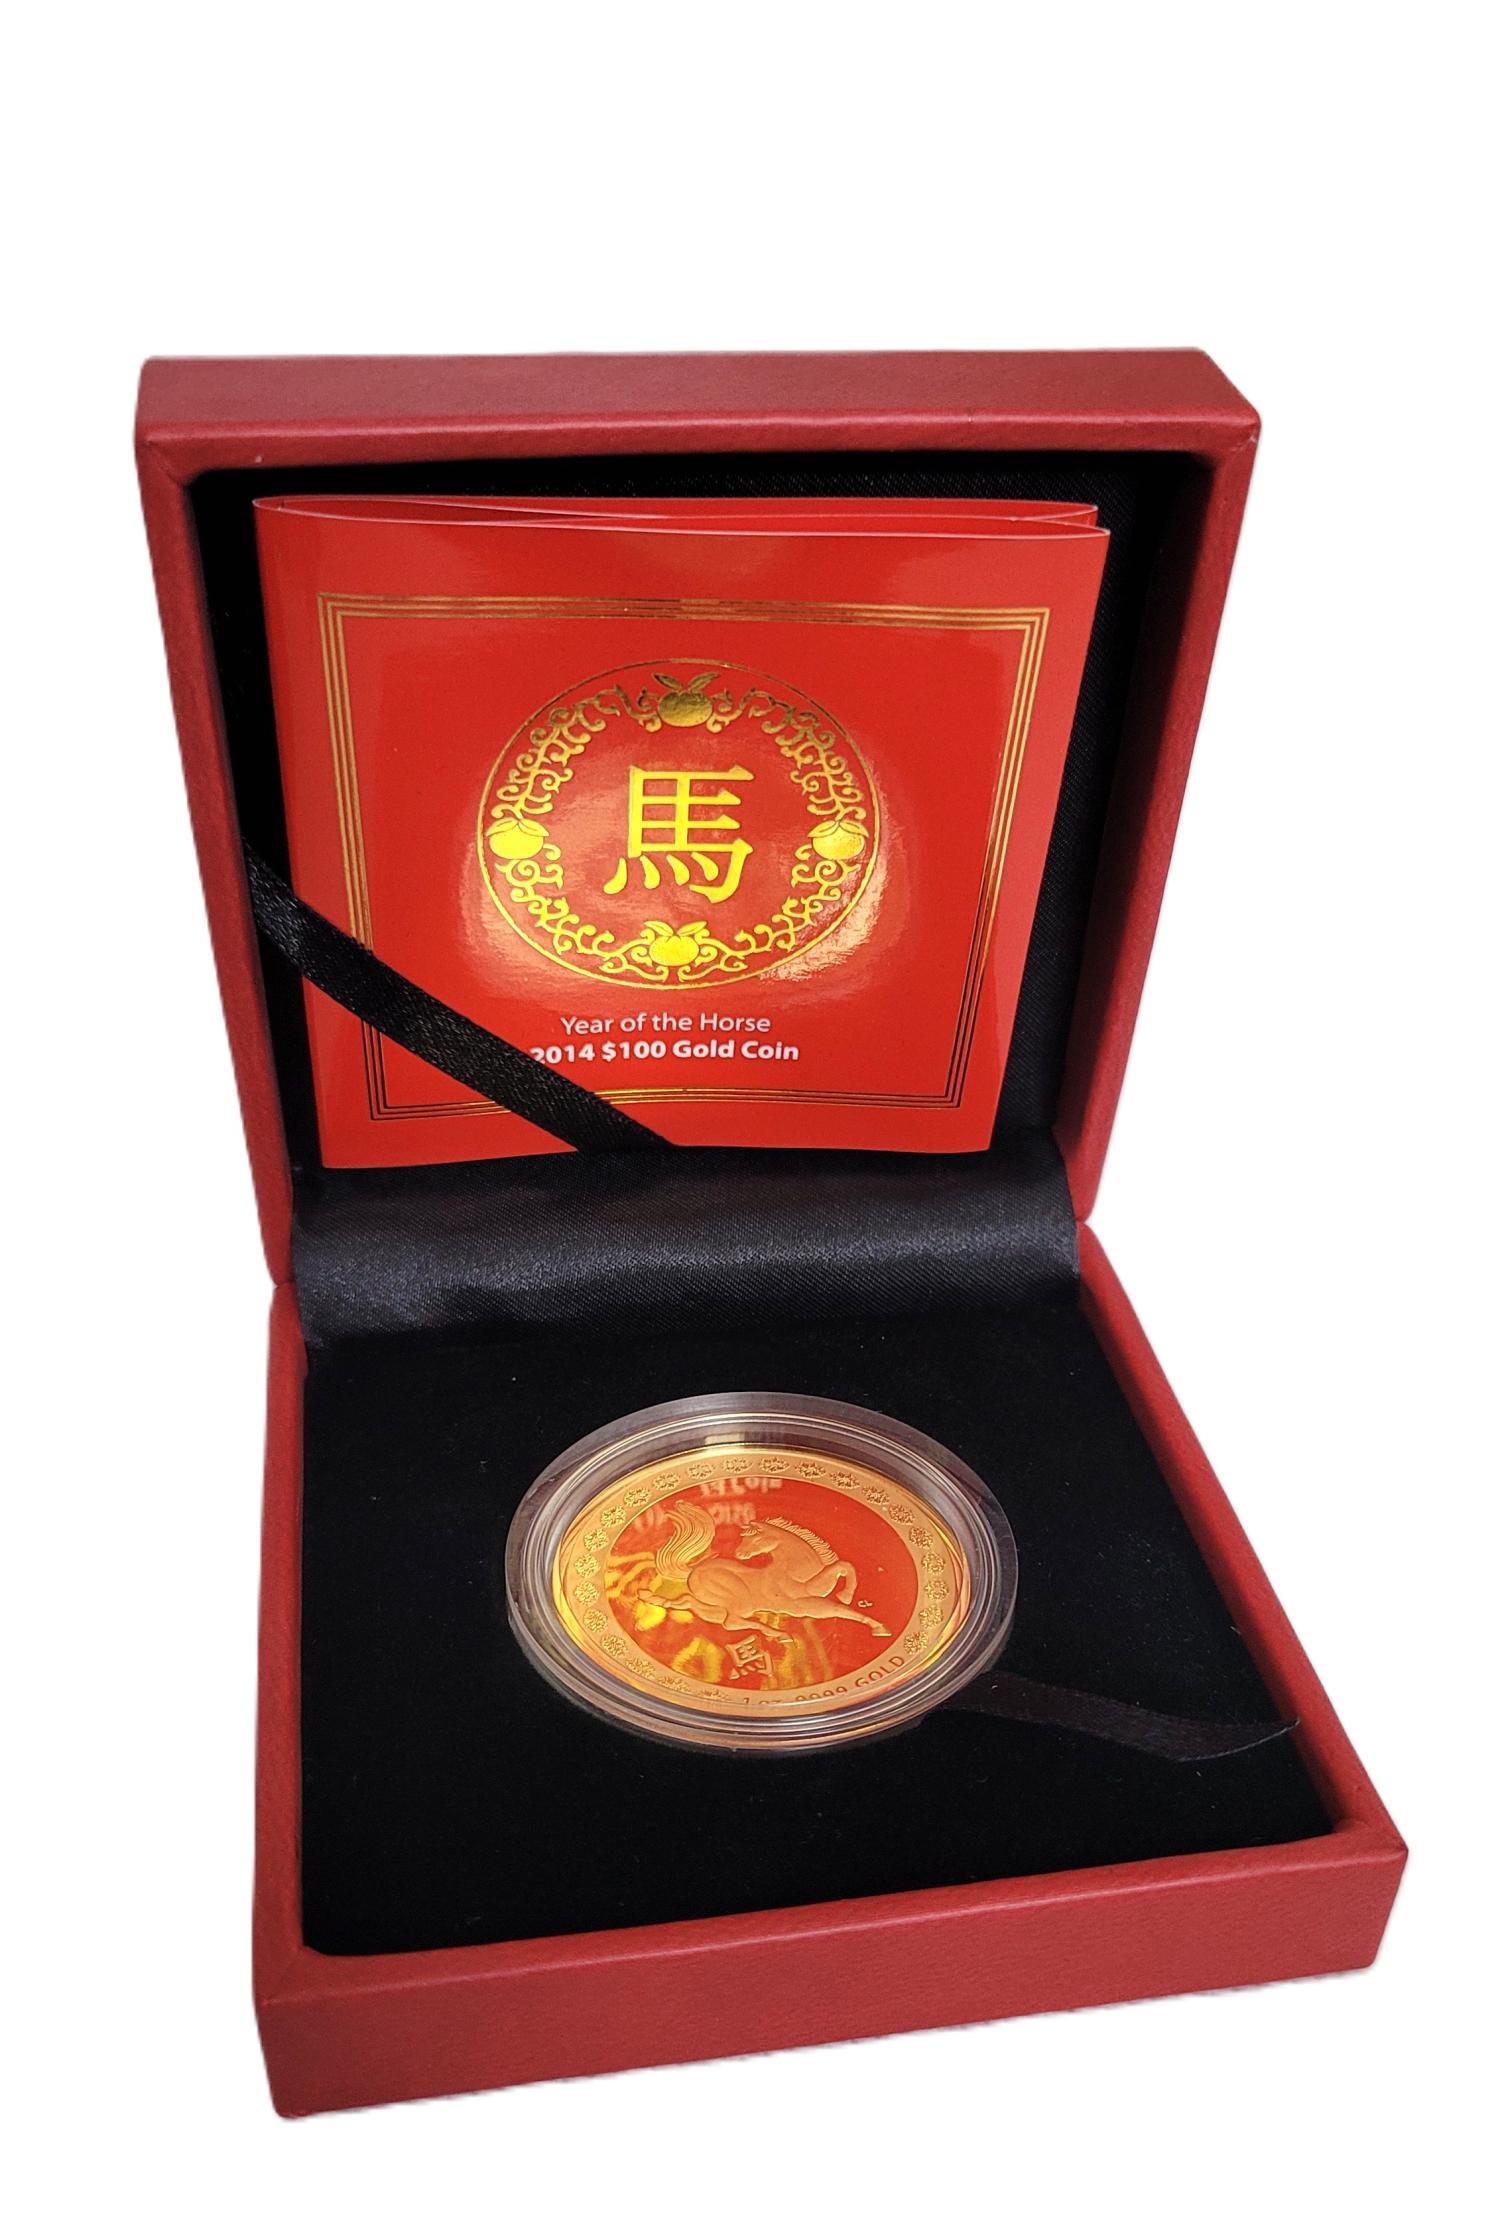 Thumbnail for 2014 Lunar Year of the Horse 1oz Gold Proof Coin